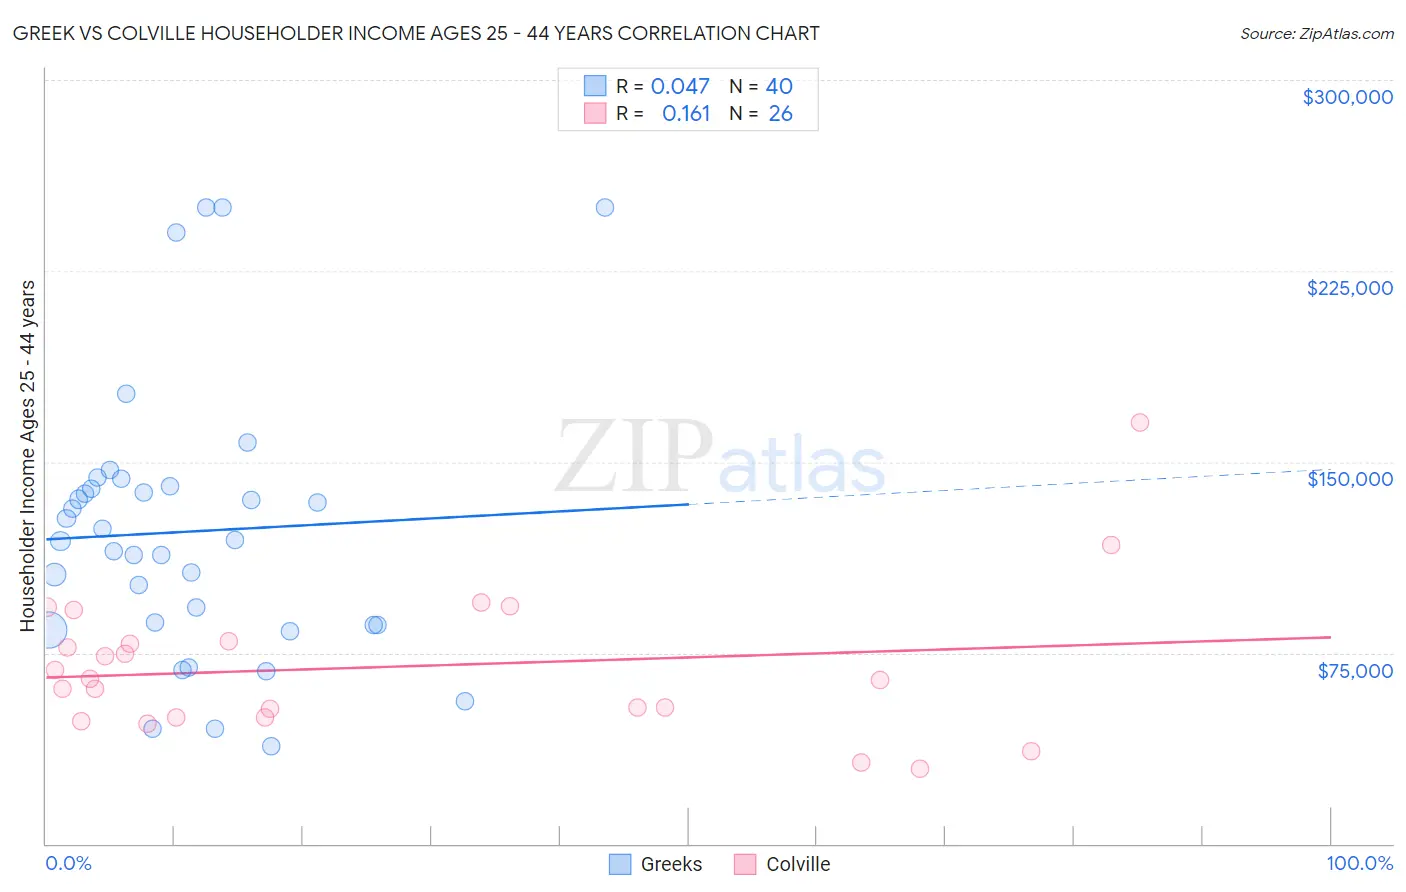 Greek vs Colville Householder Income Ages 25 - 44 years